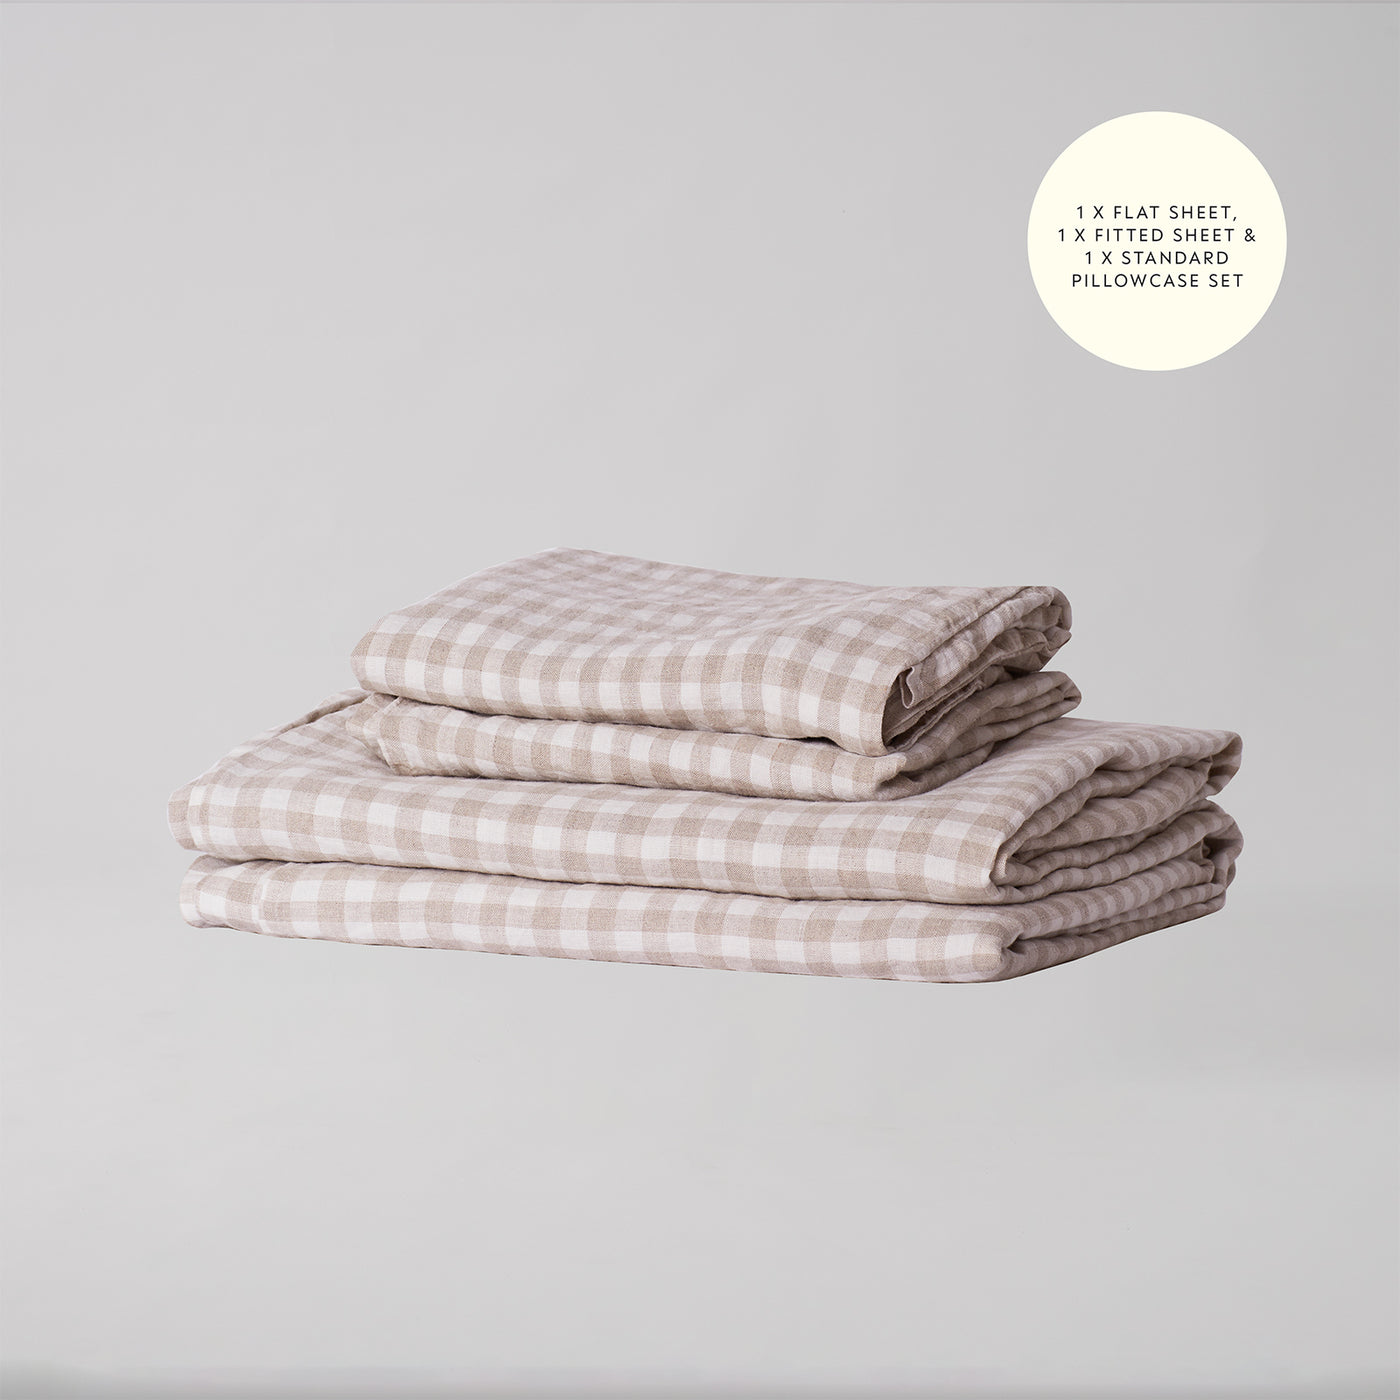 French Flax Linen Sheet Set in Beige Gingham